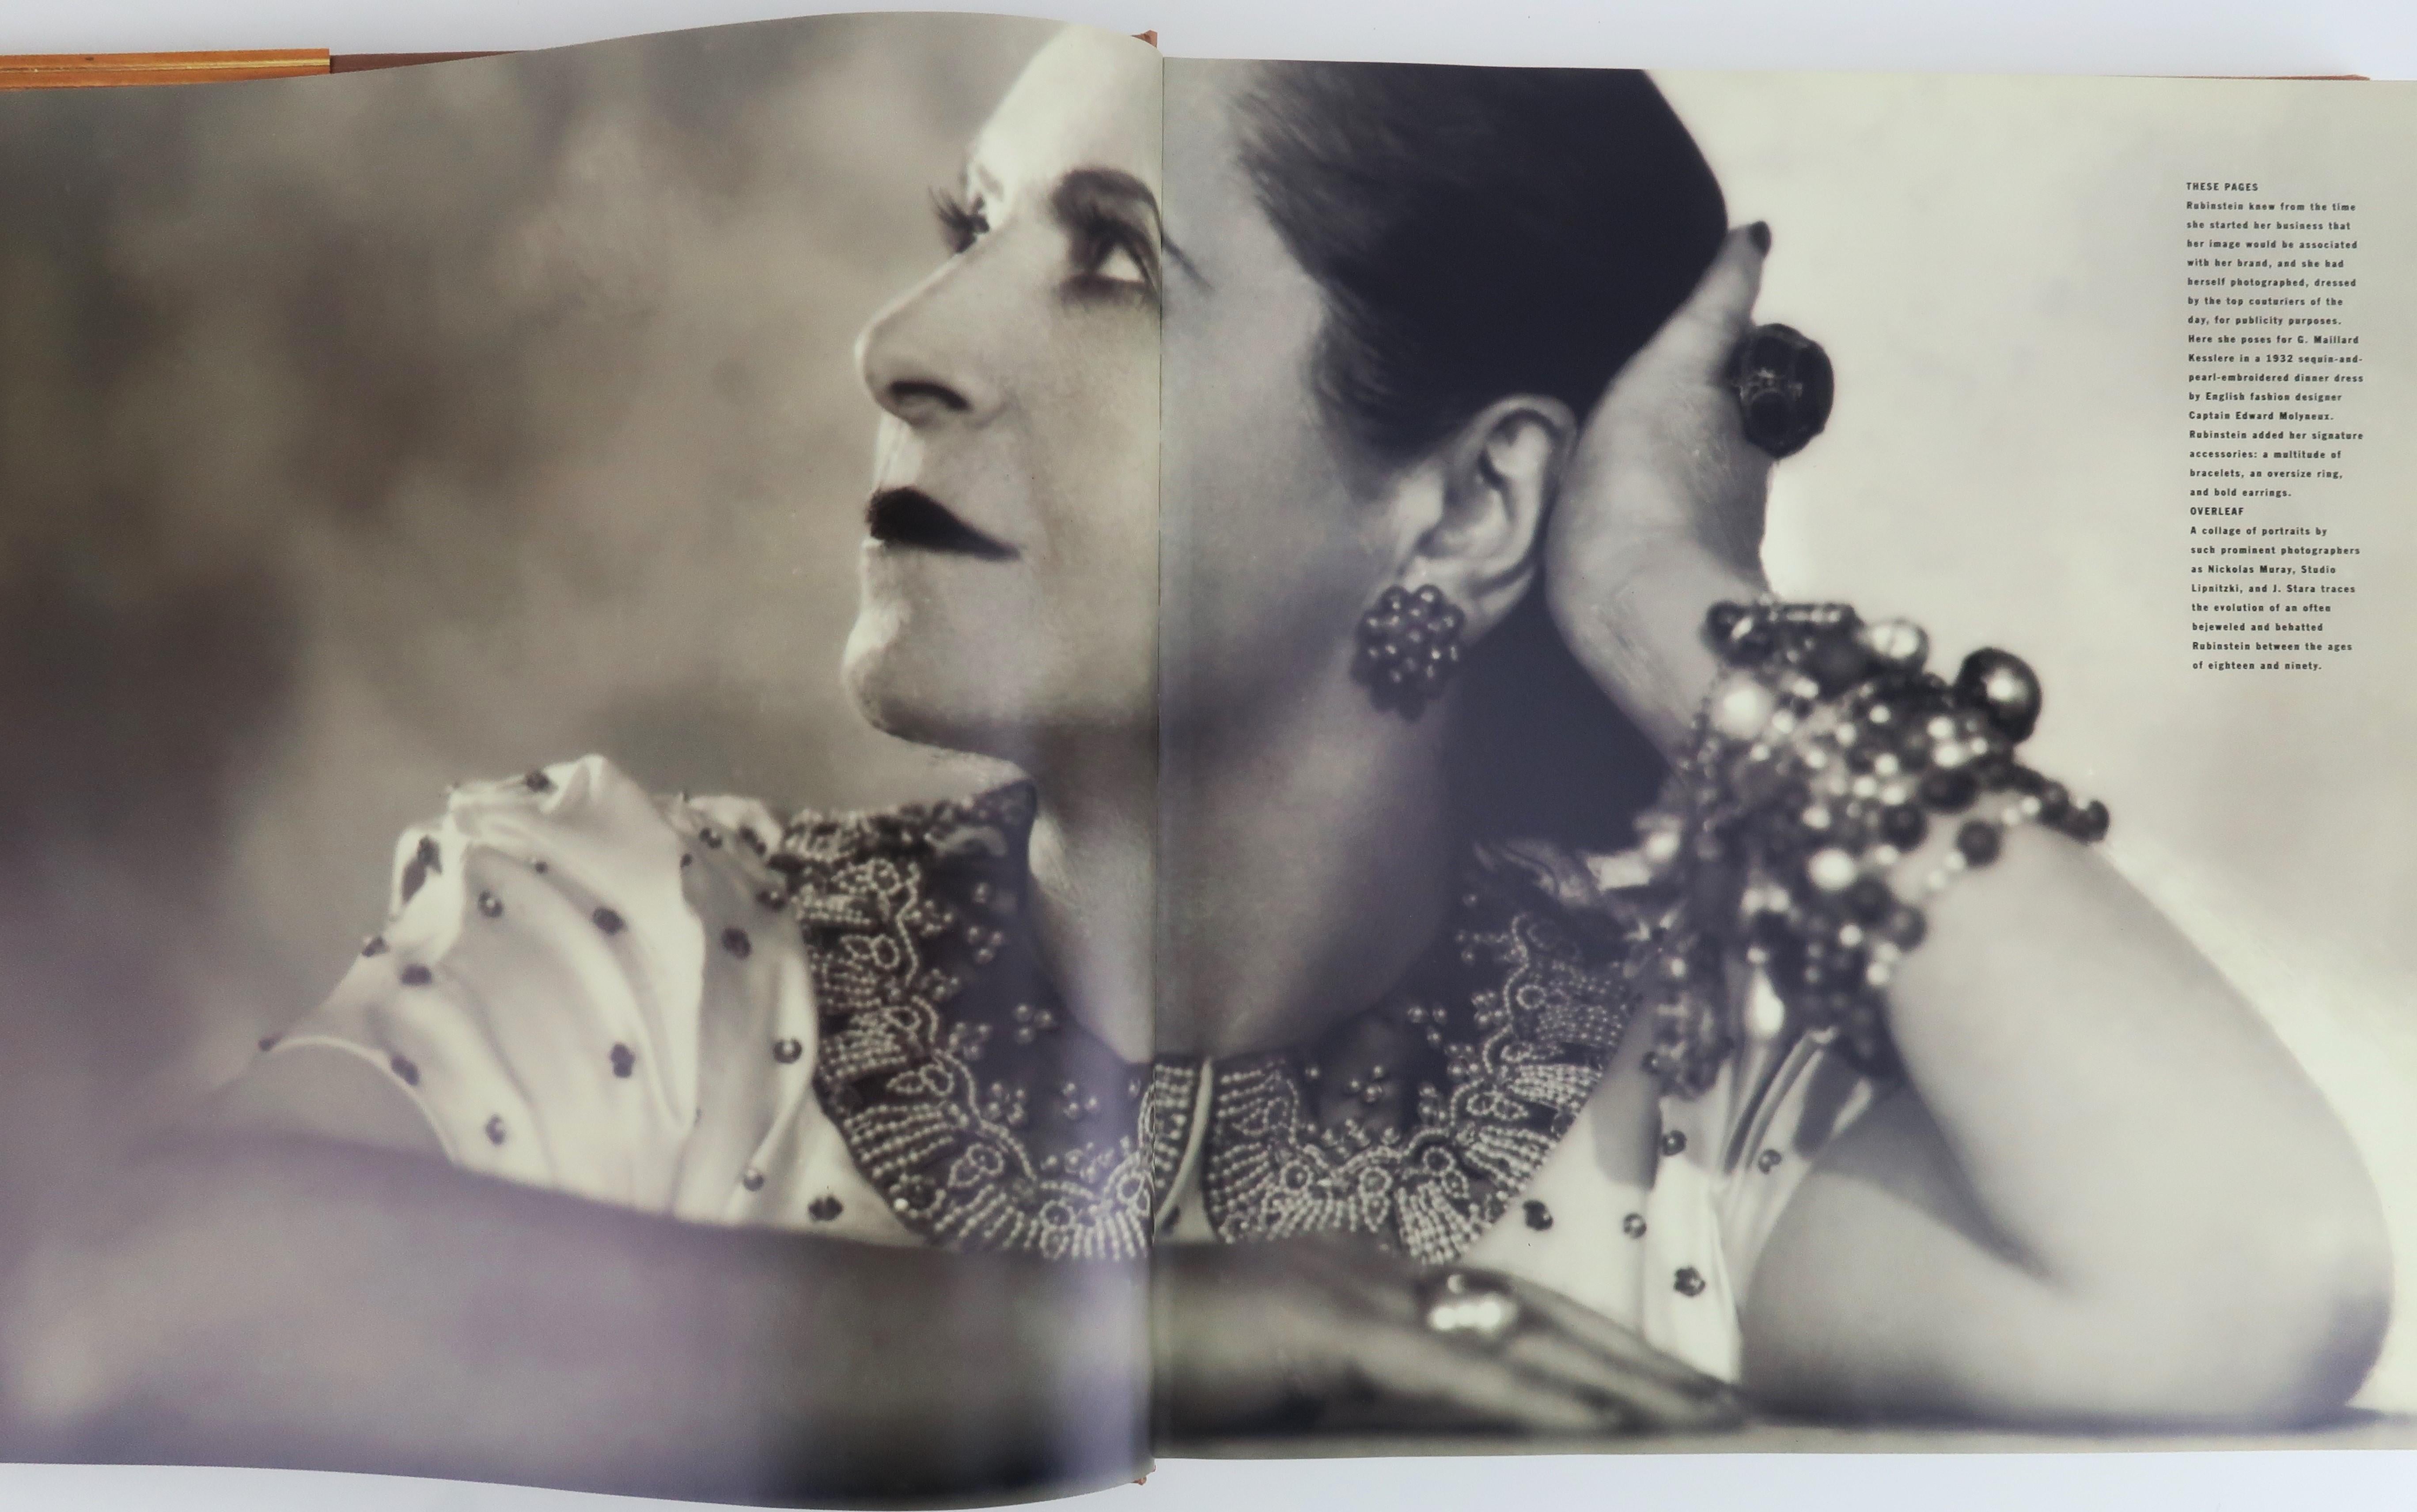 Over The Top: Helena Rubinstein, Extraordinary Style, Beauty, Art, Fashion, Design published in 2006 and written by Suzanne Slesin chronicles the life and extraordinary times of a trailblazer in the cosmetics industry.  Not only was Helena